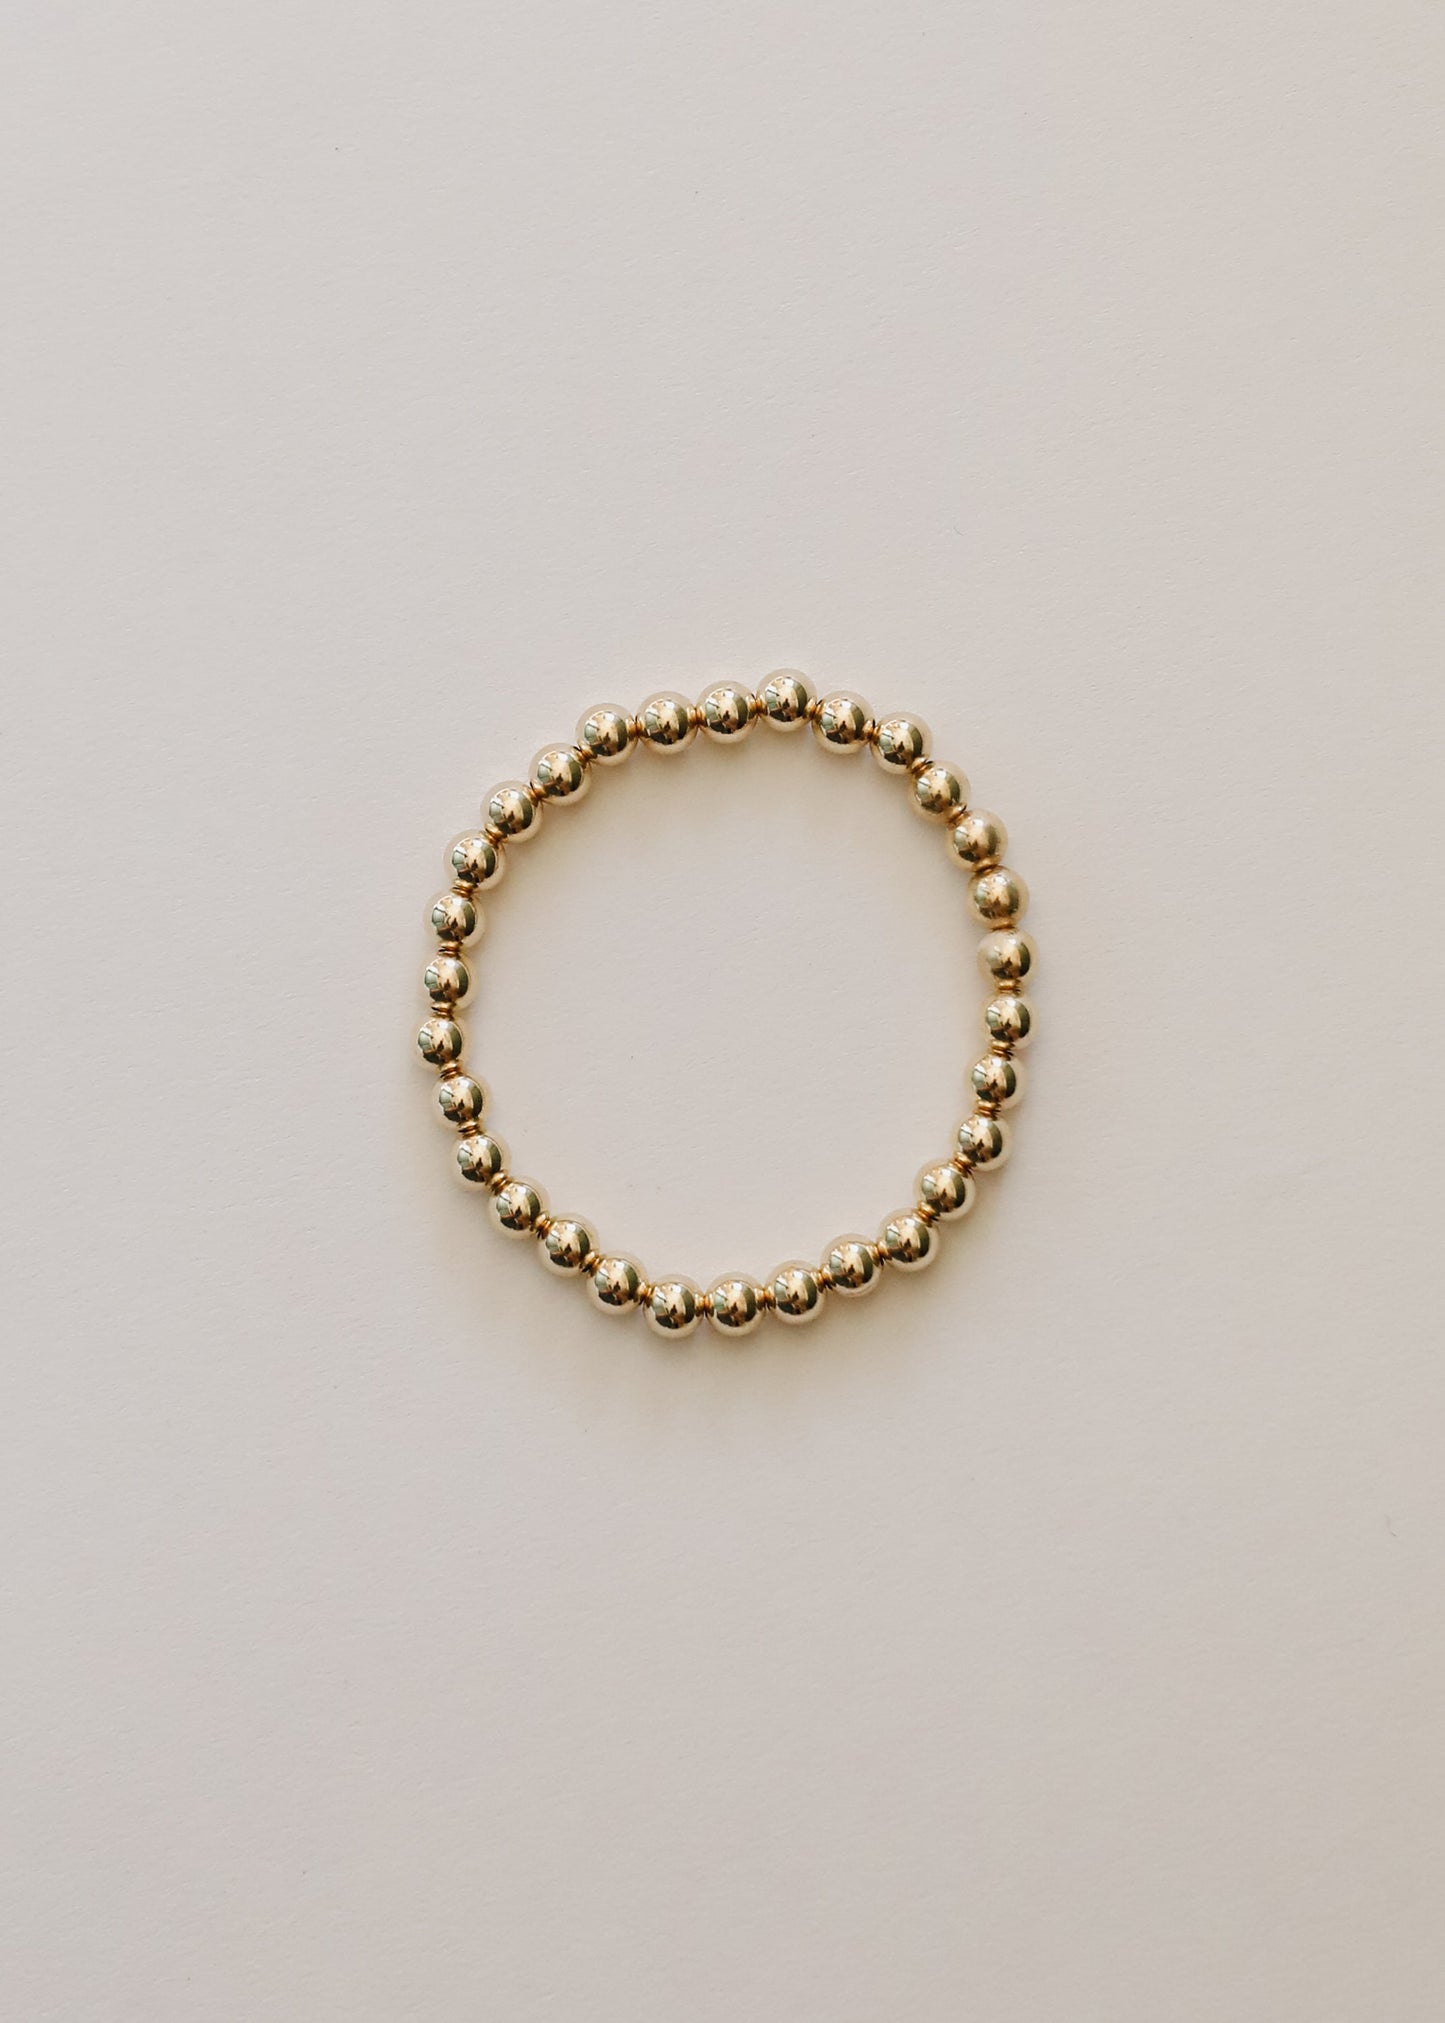 Gold Beaded Bracelets - Create Your Own Stack